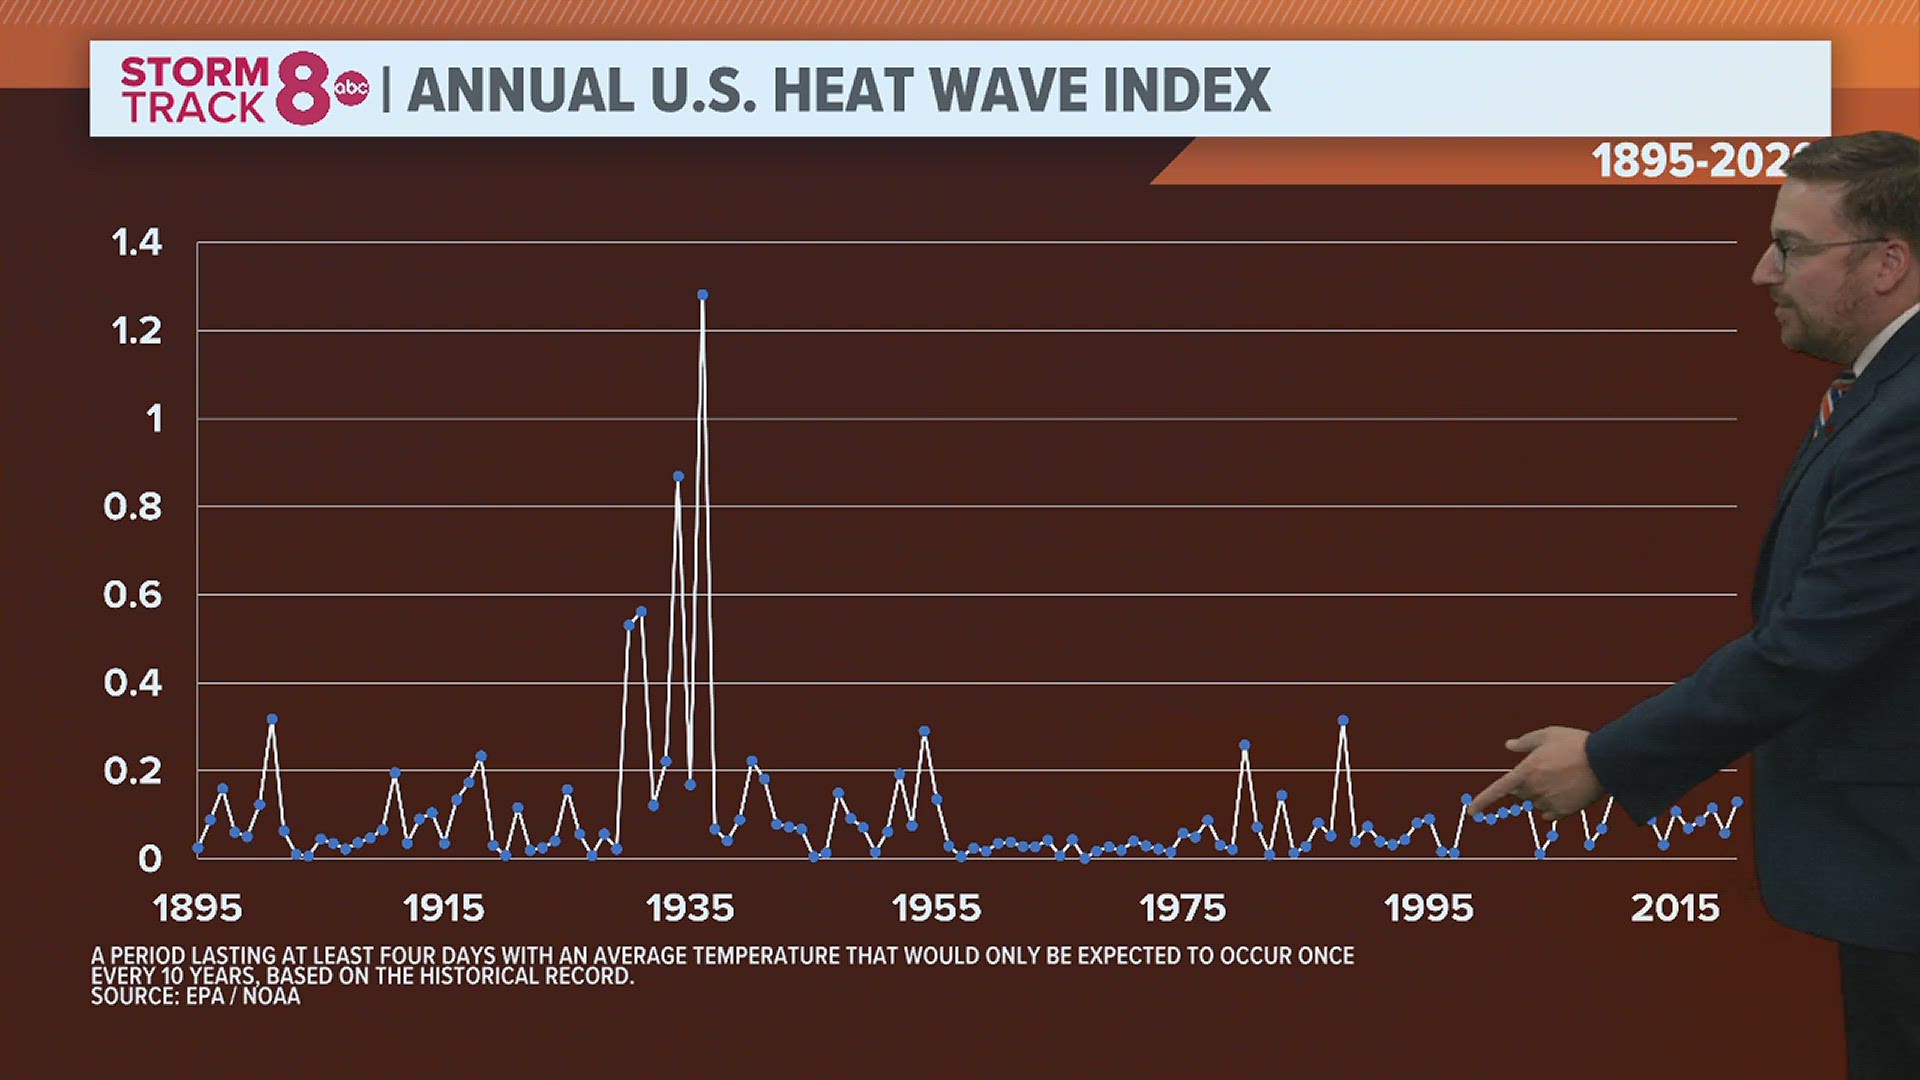 The Dustbowl of the 1930s spread record-setting heat across much of the United States. Here's how the most recent heatwave compares.